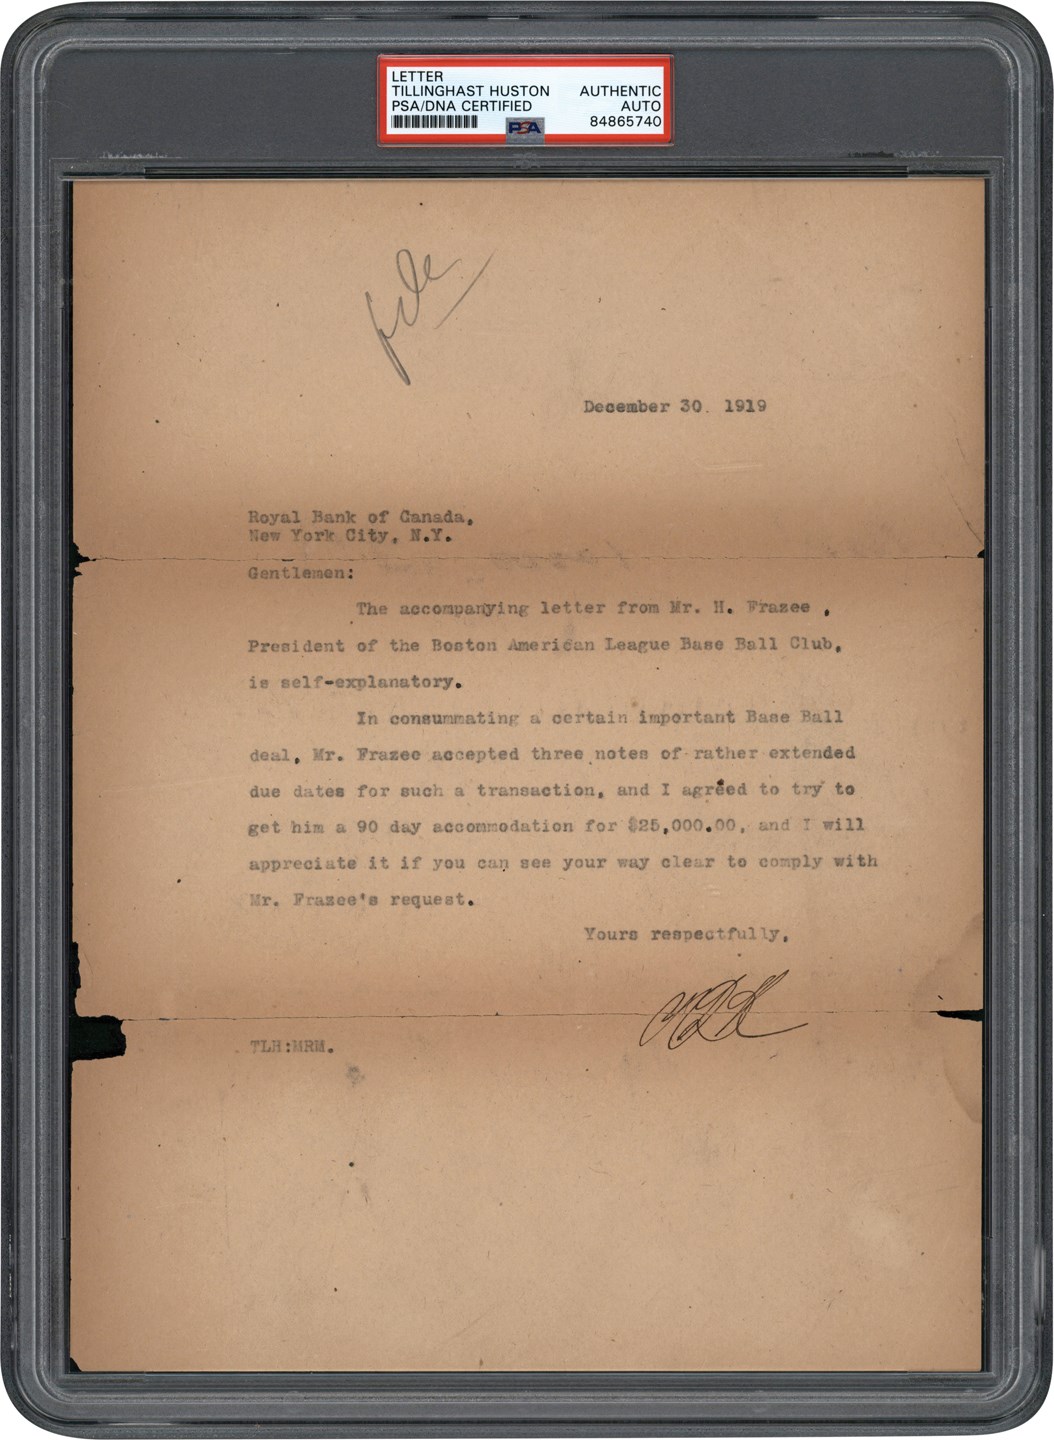 The Babe Ruth Sale Archive - December 30th, 1919, Colonel Huston Letter "Consummating a Certain Important Base Ball Deal" aka The Babe Ruth Sale (ex-Barry Halper Collection)